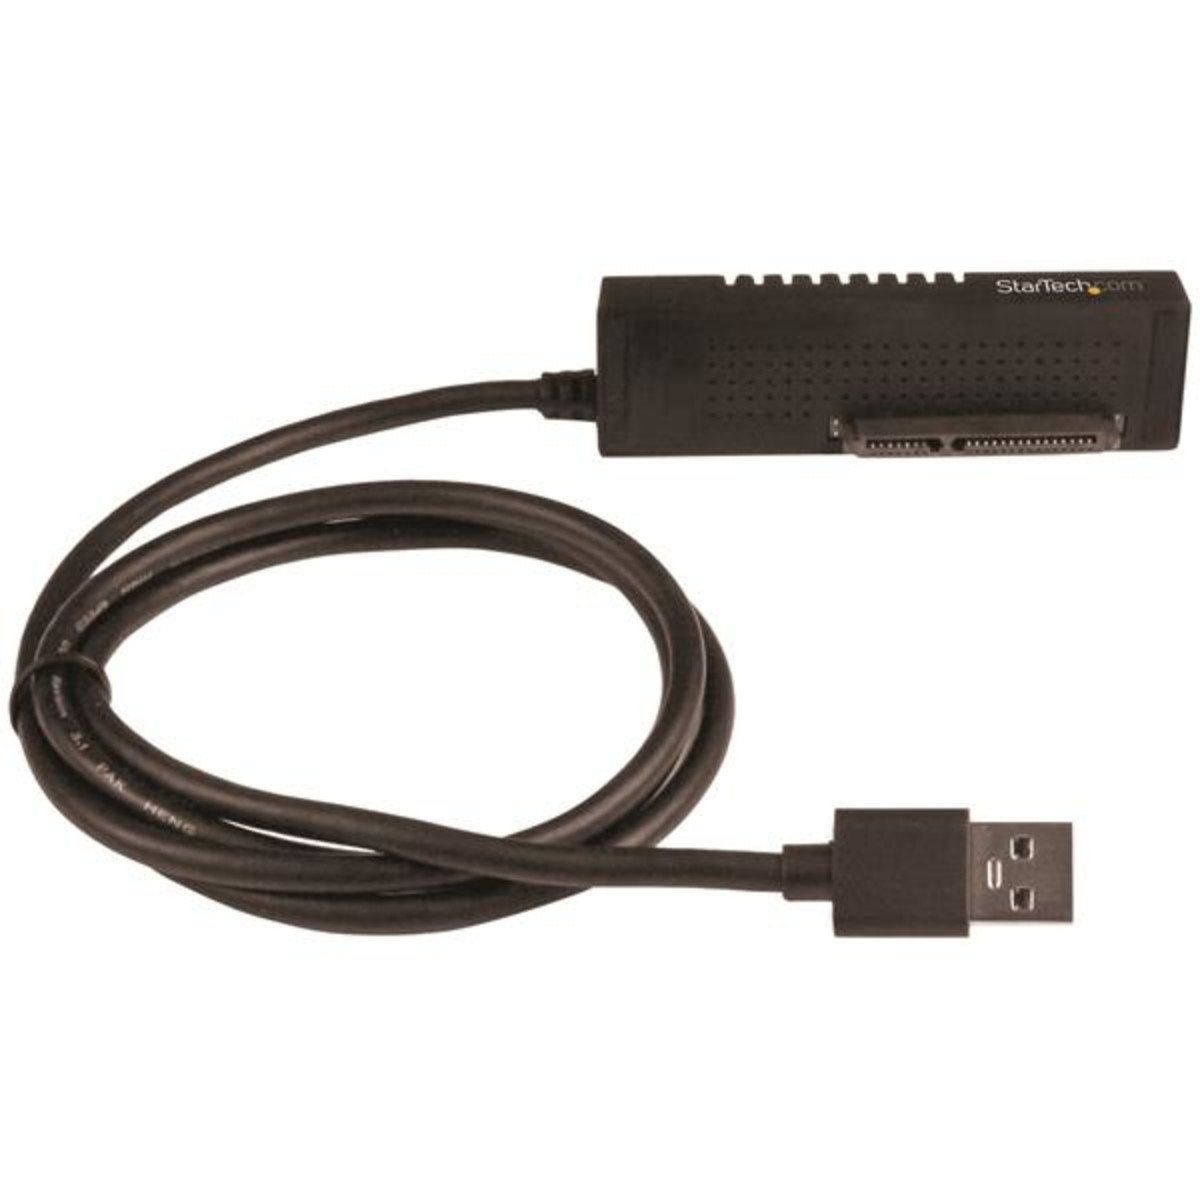 USB 3.1 Adapter Cable for 2.5 3.5 SATA